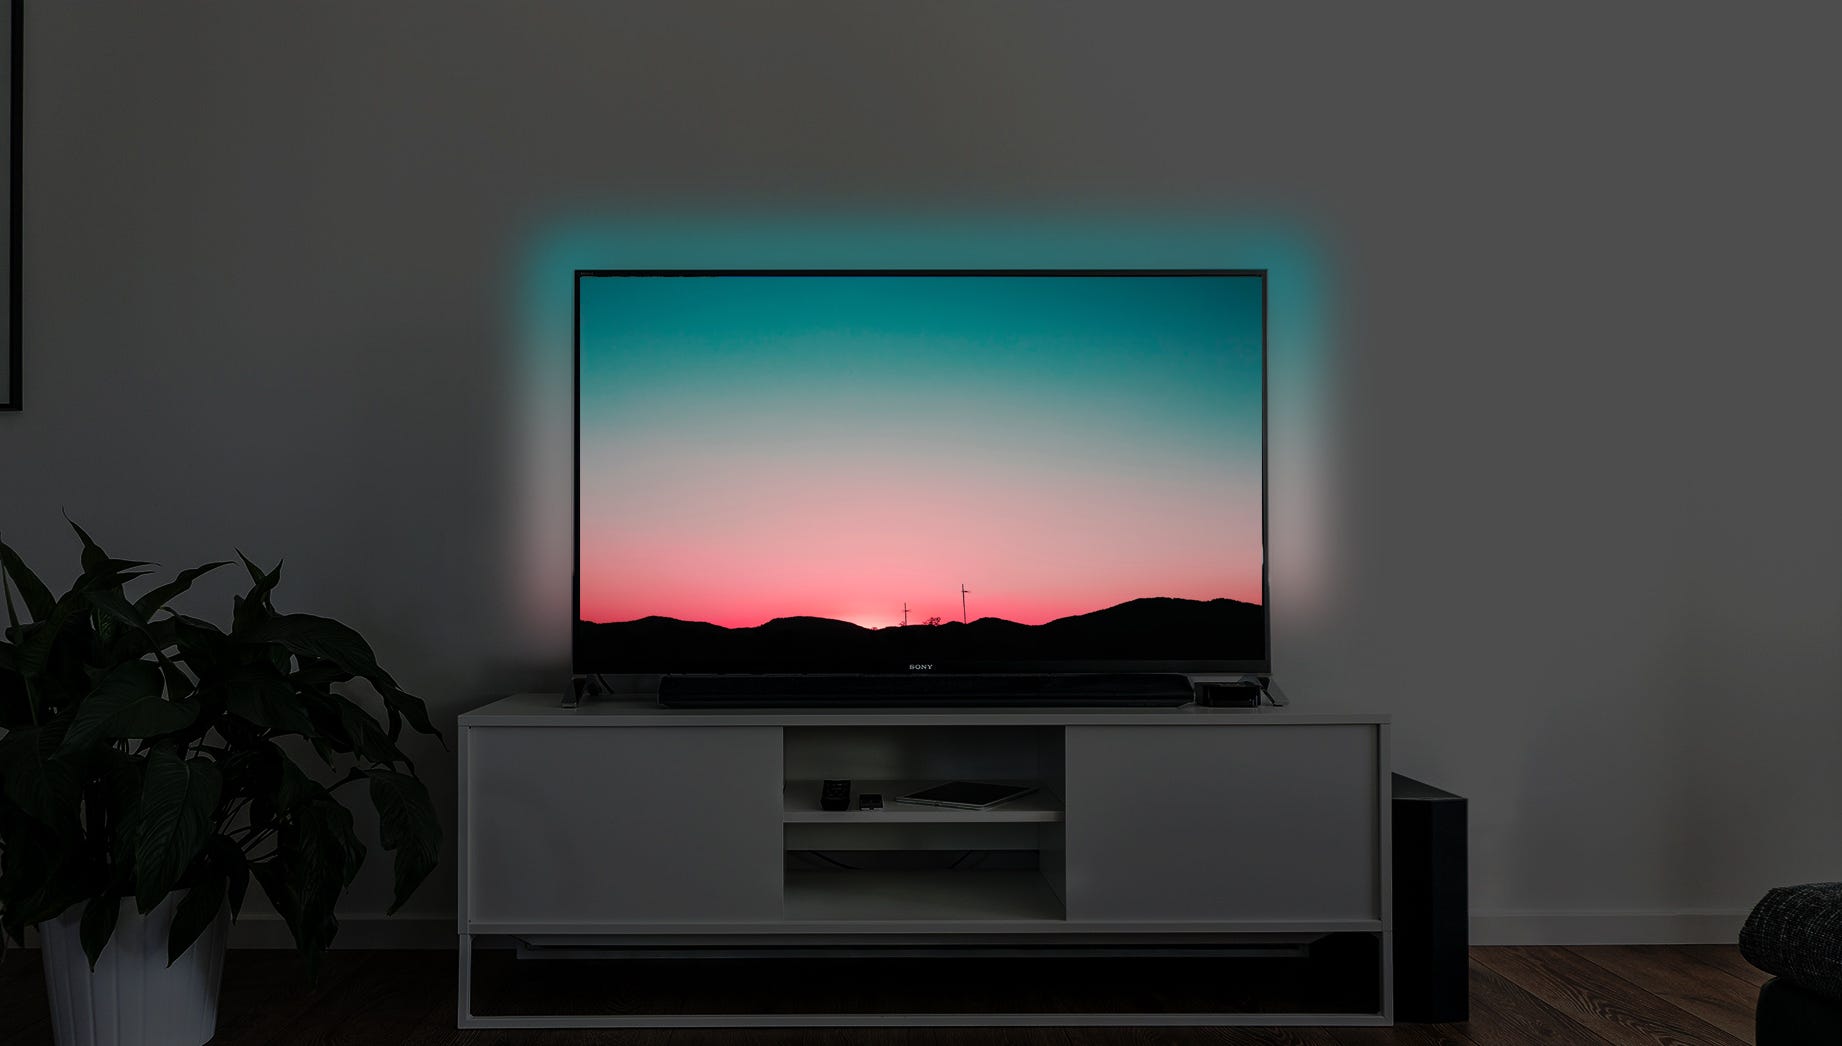 The Best TV Experience: DIY Philips Ambilight | by Brian Singh |  HackerNoon.com | Medium